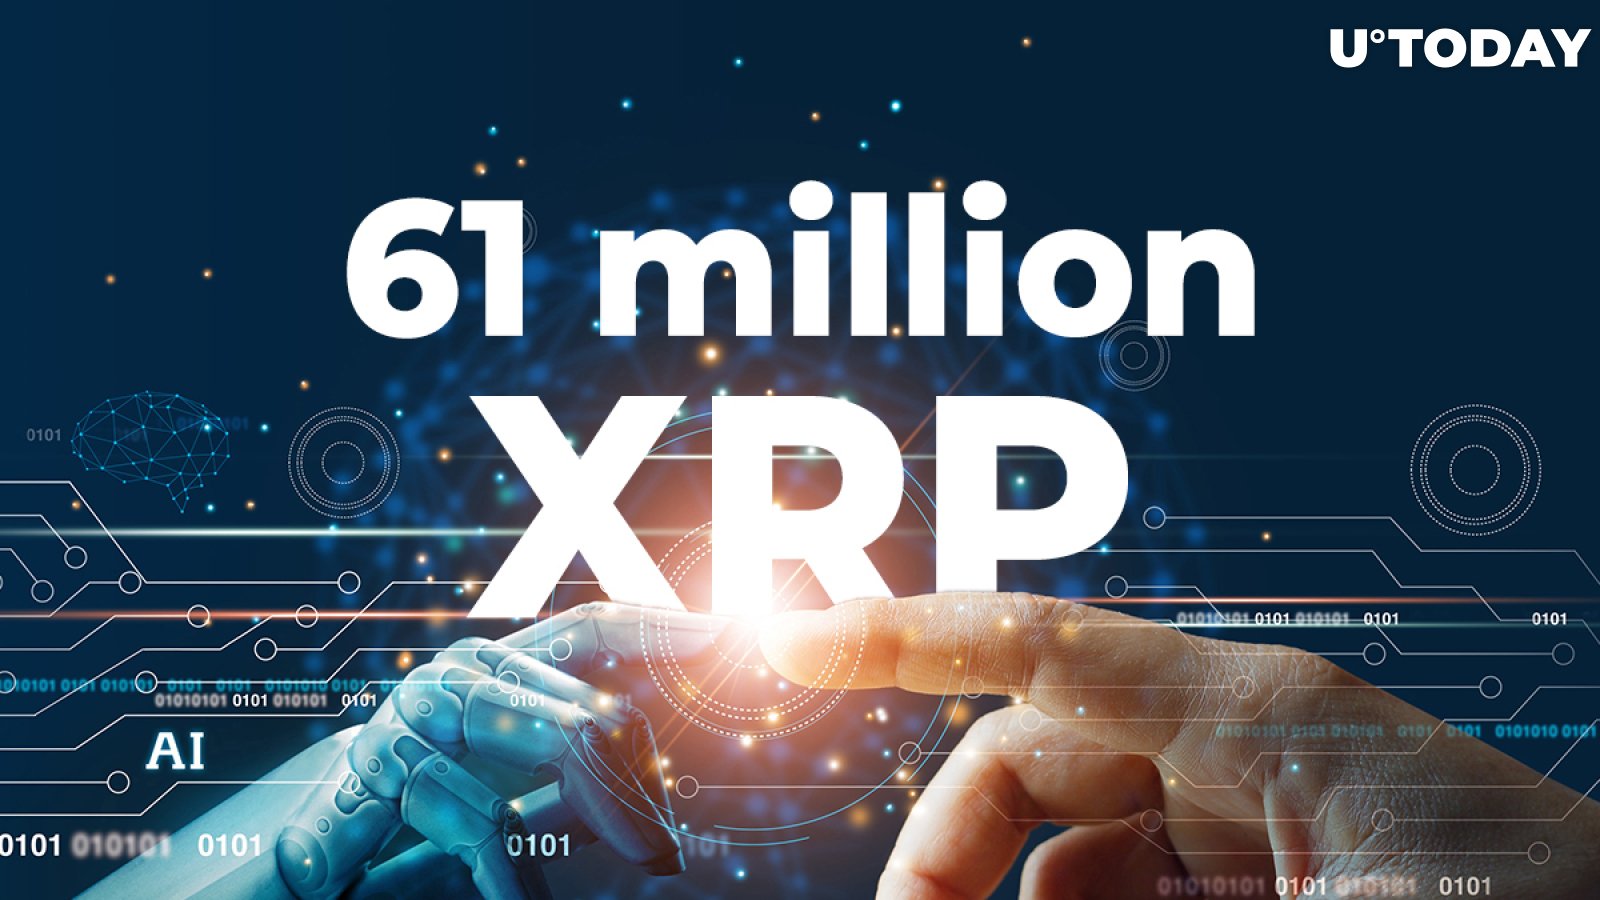  61 Million XRP Shifted by Top Crypto Exchanges, While XRP Sits at $0.57